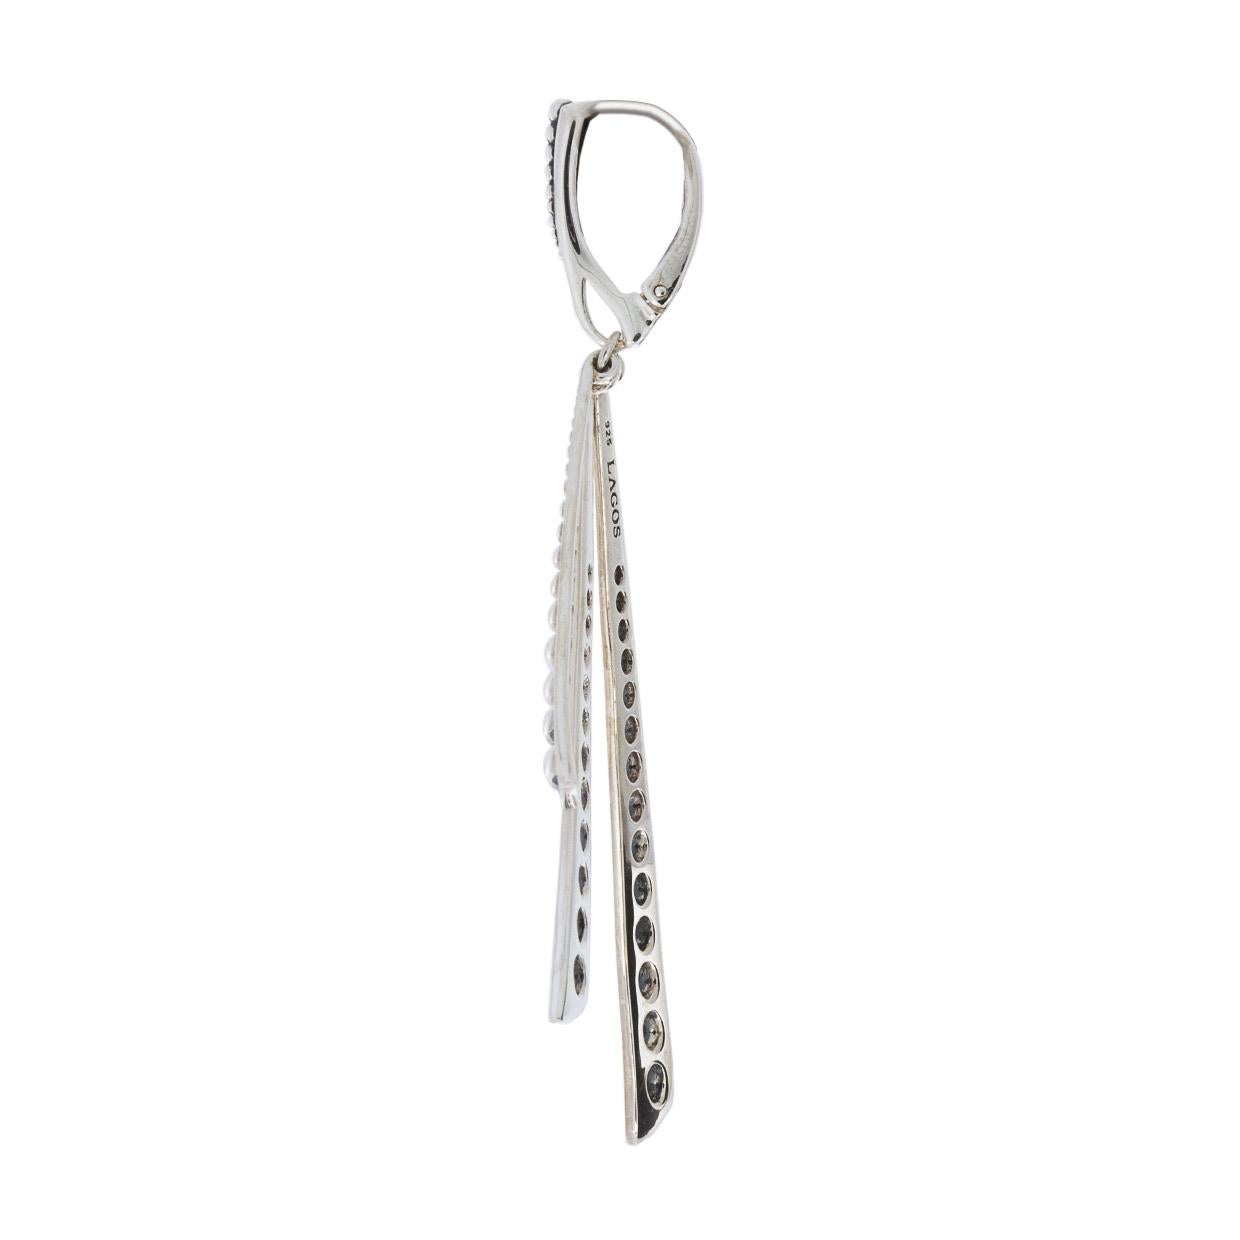 Item Details

Estimated Retail $375.00
Brand Lagos
Collection Signature Caviar
Metal Sterling Silver
Finish Polished
Style Drop/Dangle
Fastening Leverback
Length x Width 77 x 27 mm
Metal Purity 925 parts per 1000

In 1977, LAGOS was founded by